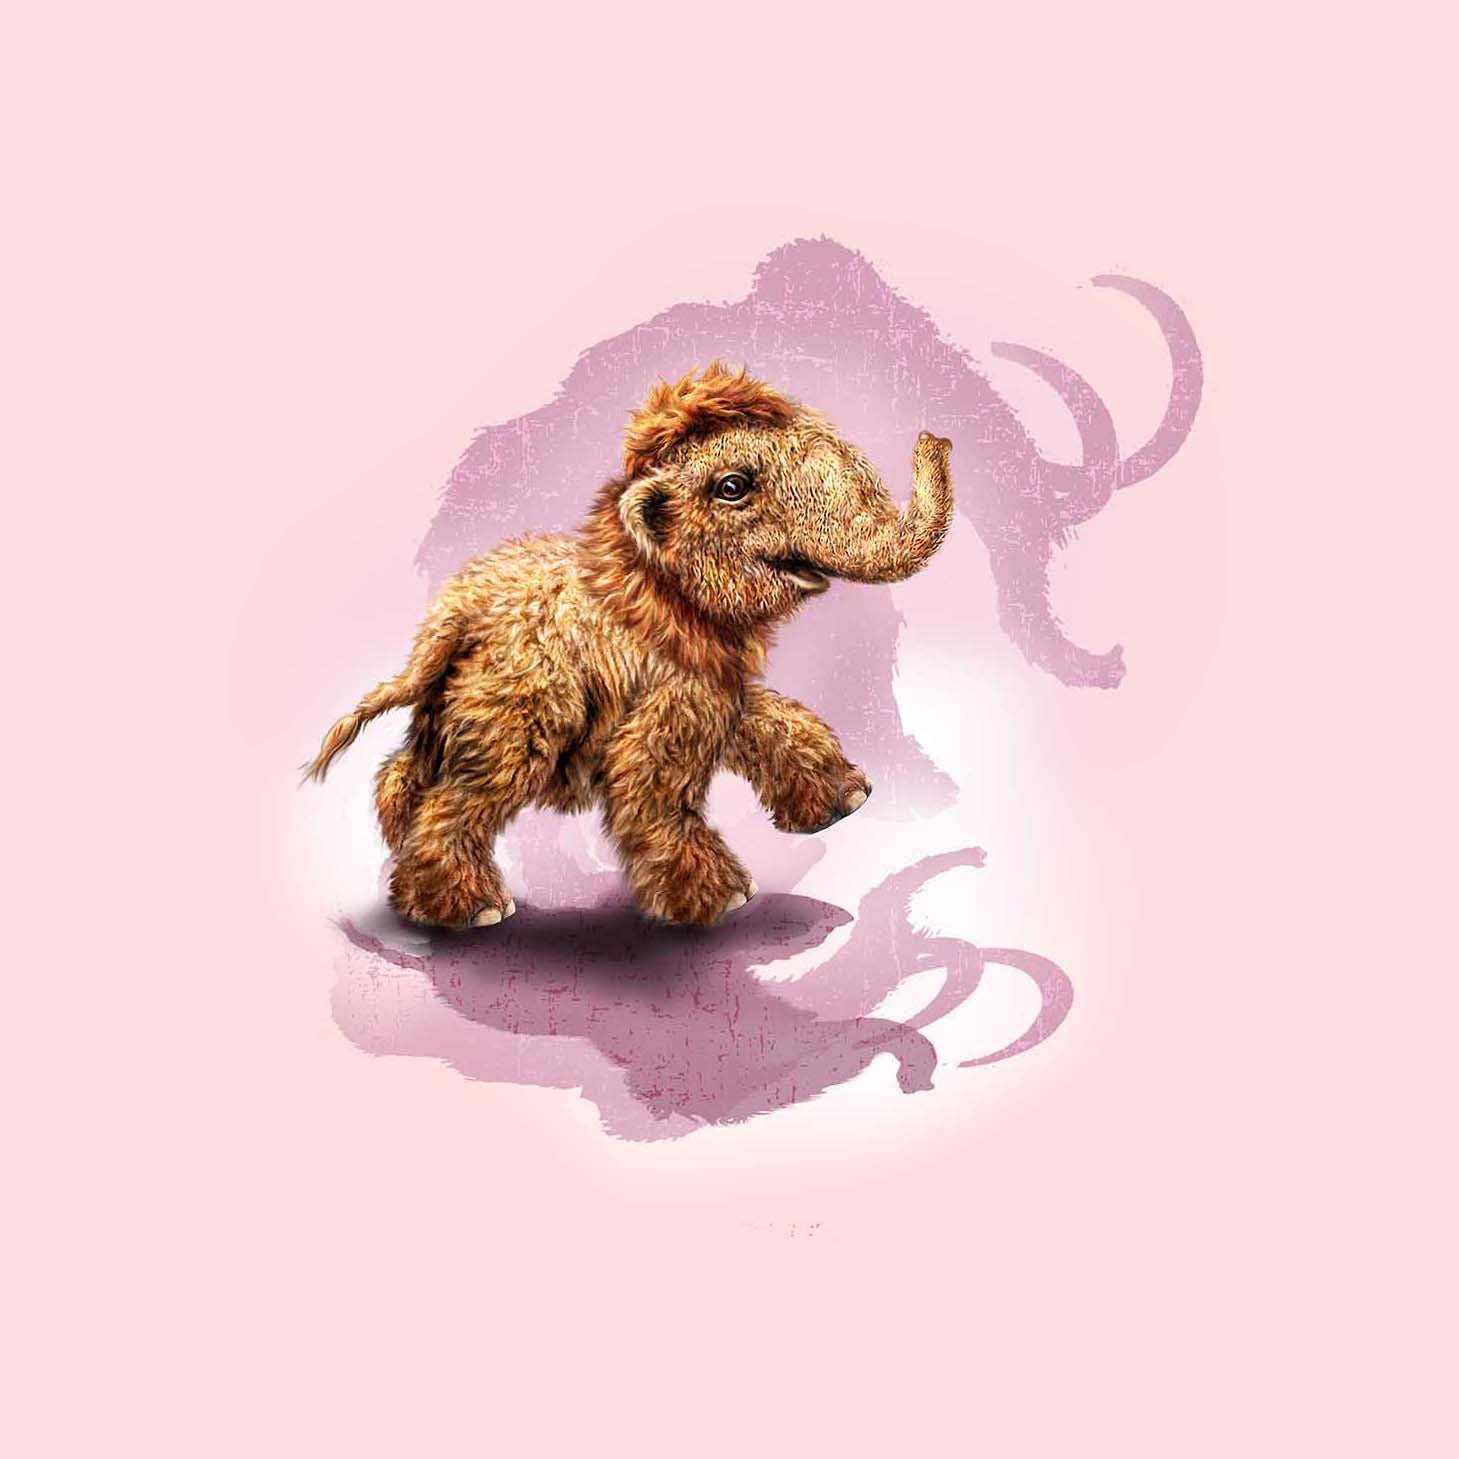 Little Mighty Mammoth - painting of baby mammoth wth it's mother's shadow in the background